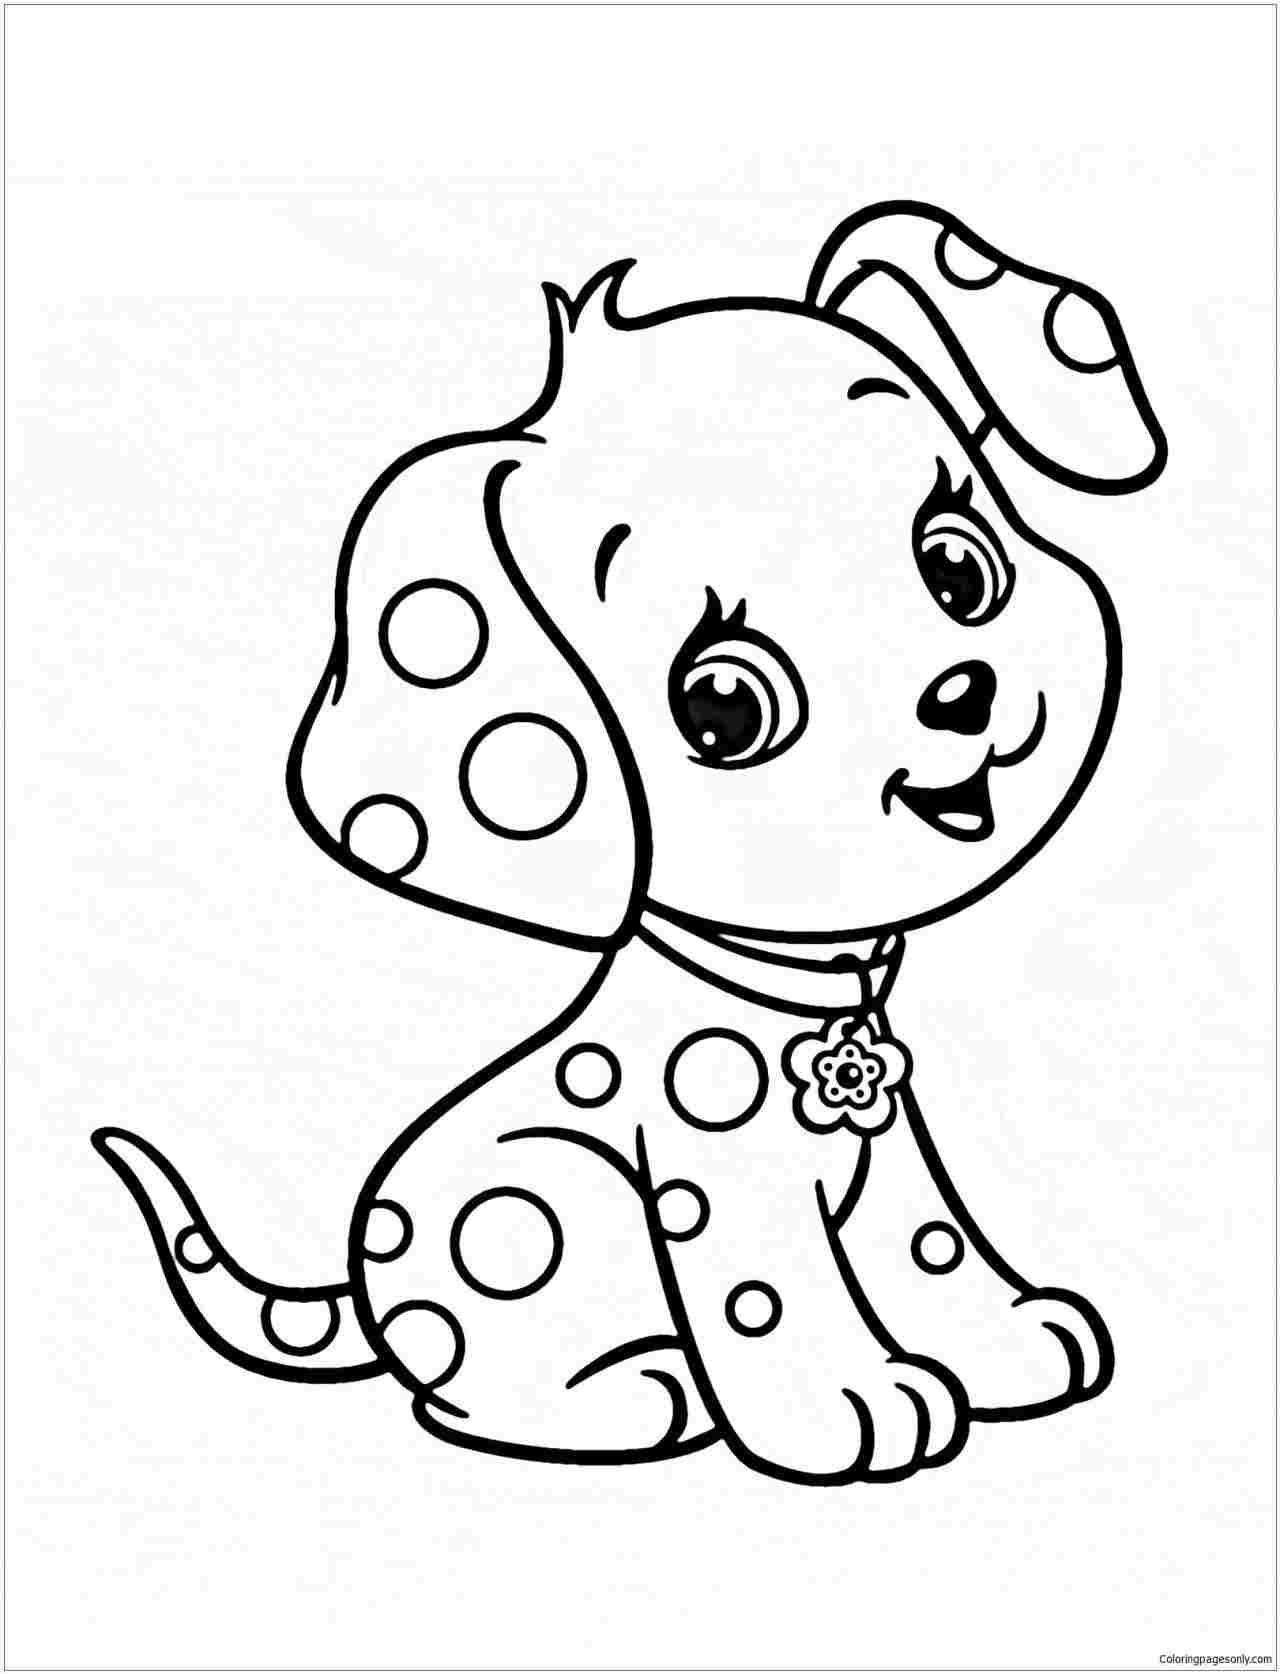 Little Puppy Coloring Pages How Cute Puppy Drawings For Kids To Draw A Drawing